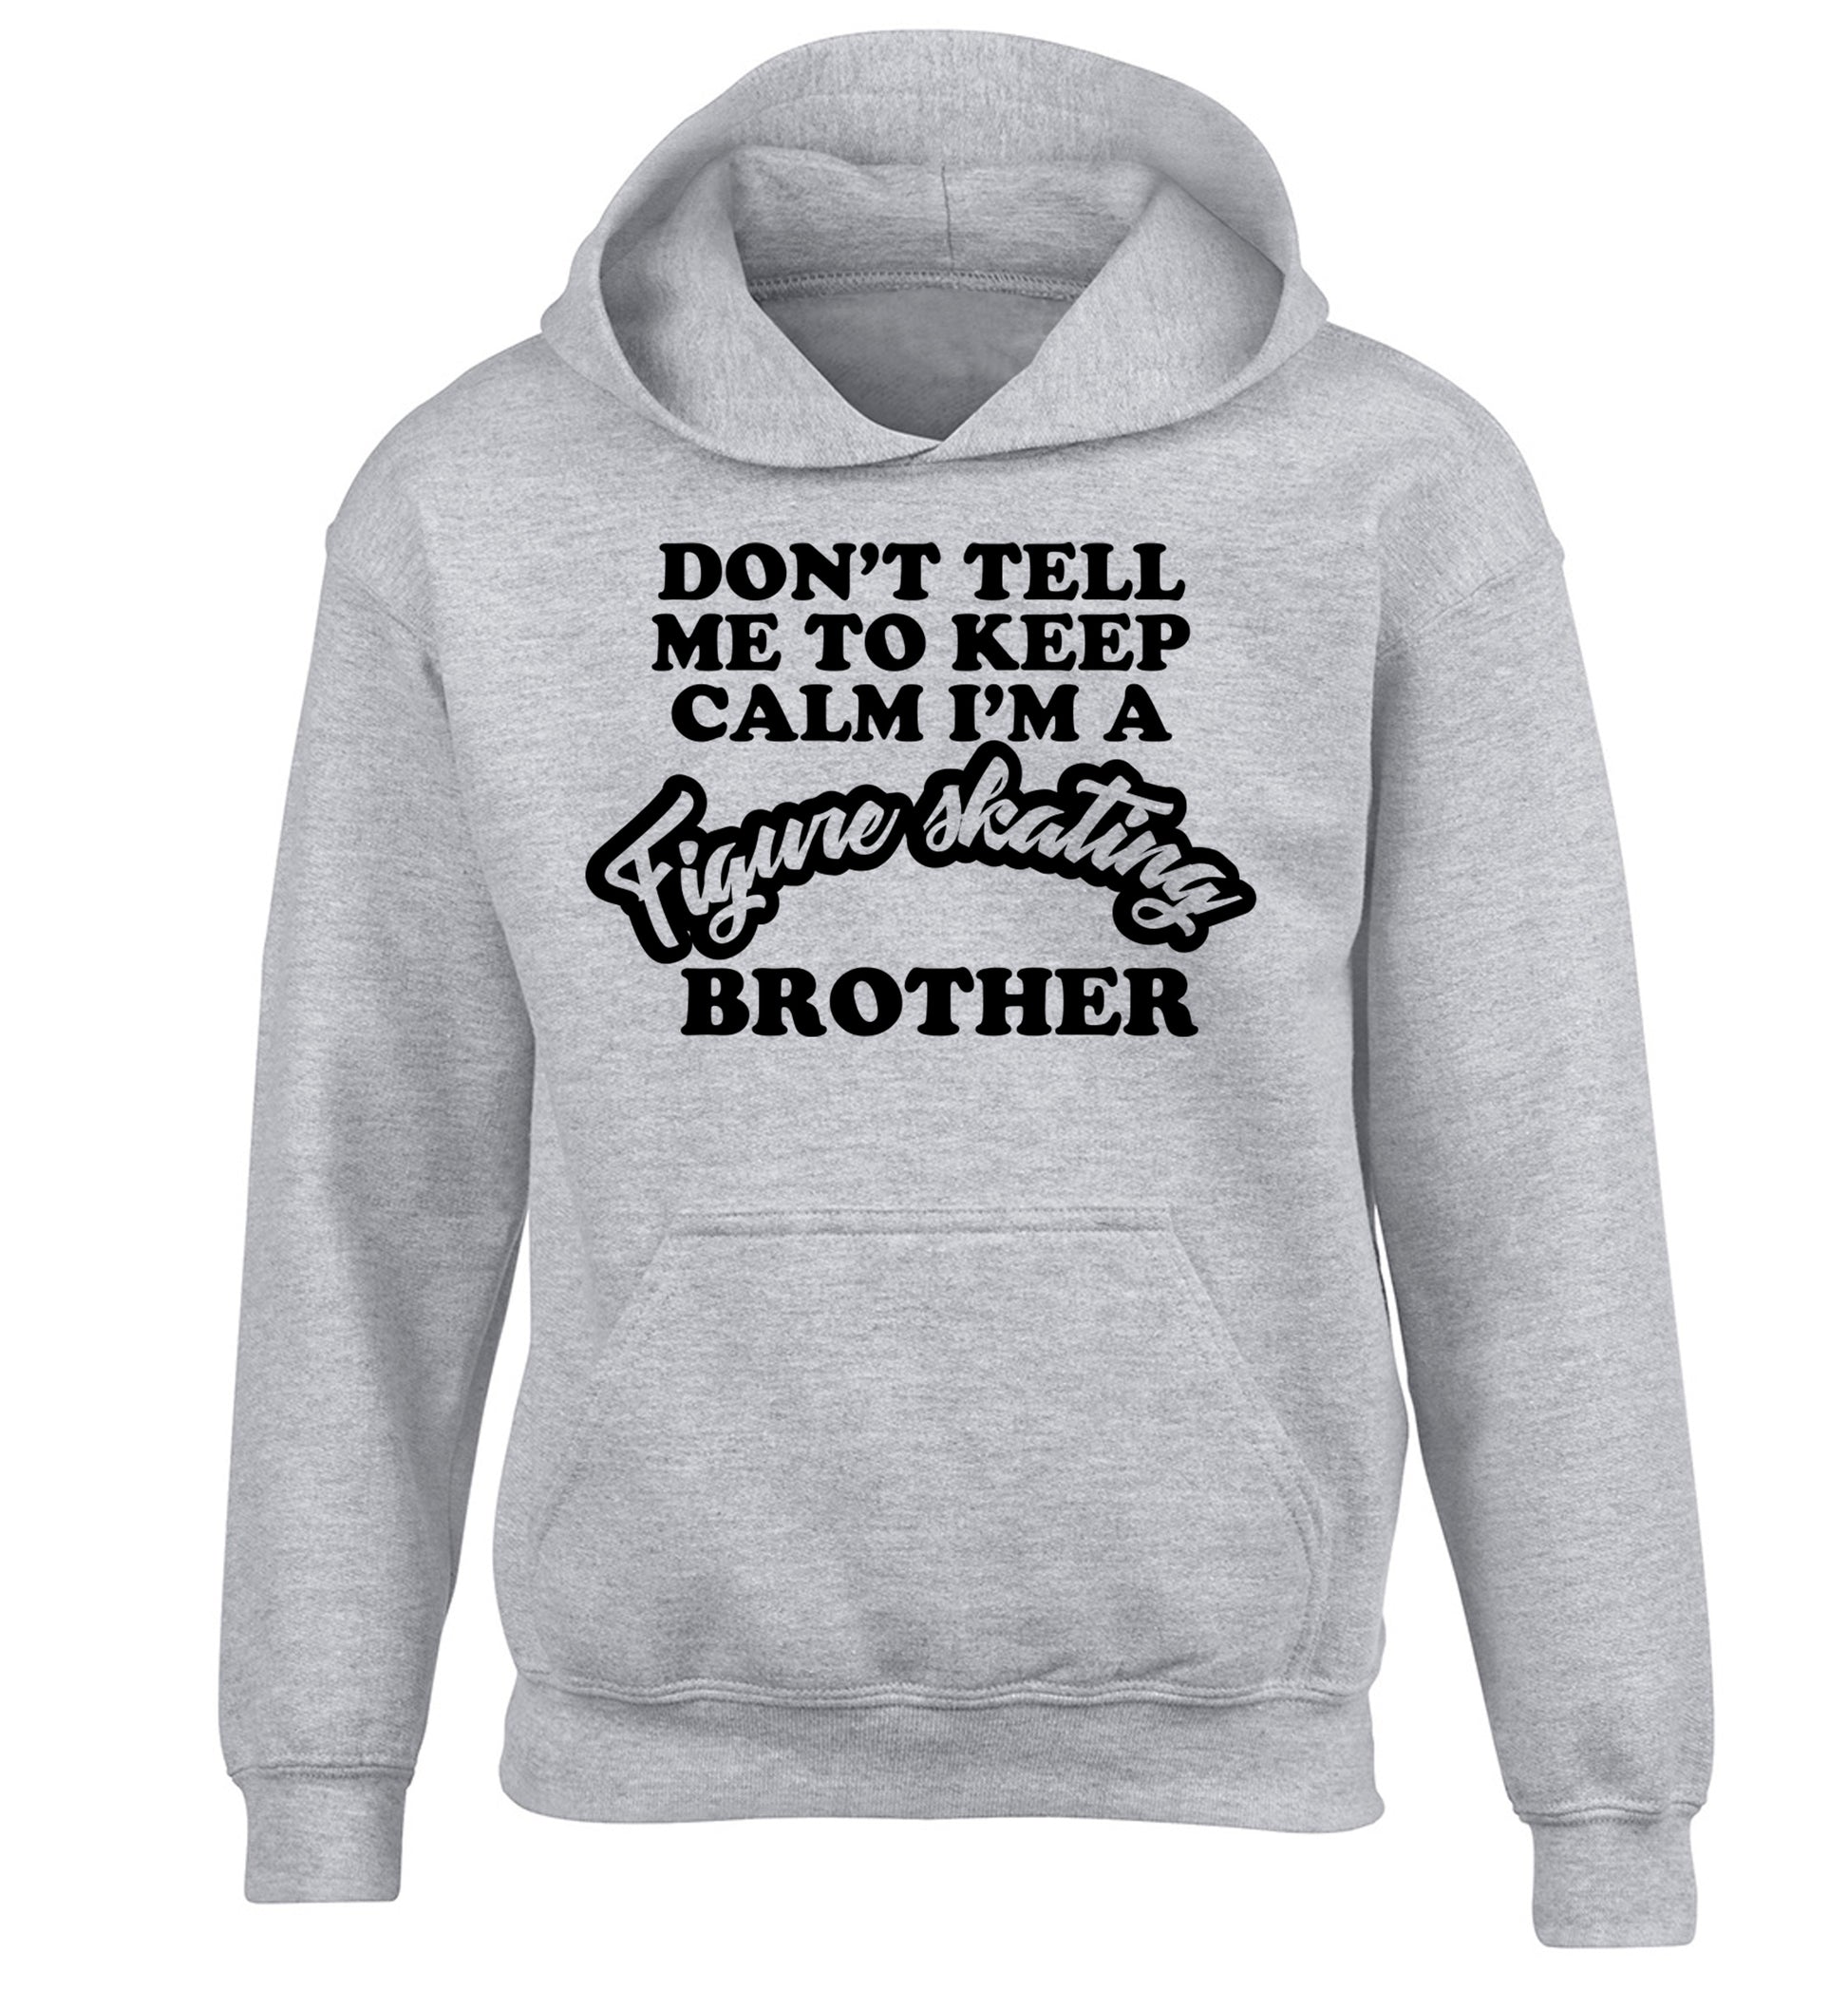 Don't tell me to keep calm I'm a figure skating brother children's grey hoodie 12-14 Years